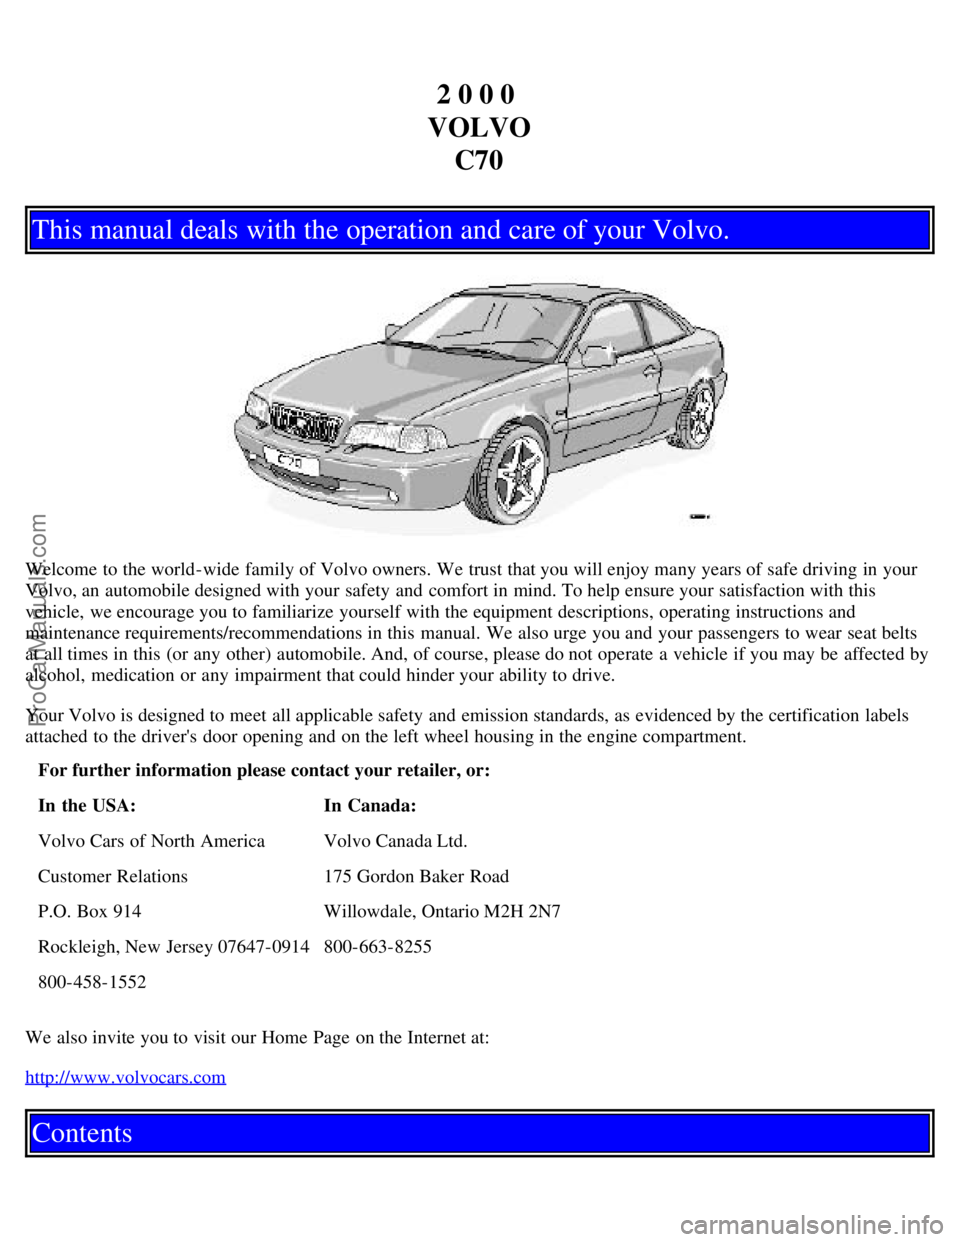 VOLVO C70 2000  Owners Manual 2 0 0 0 
VOLVO C70
This manual deals with the operation and care of your Volvo.
Welcome to the world-wide  family of Volvo owners. We trust that you will enjoy many years of safe driving in your
Volvo